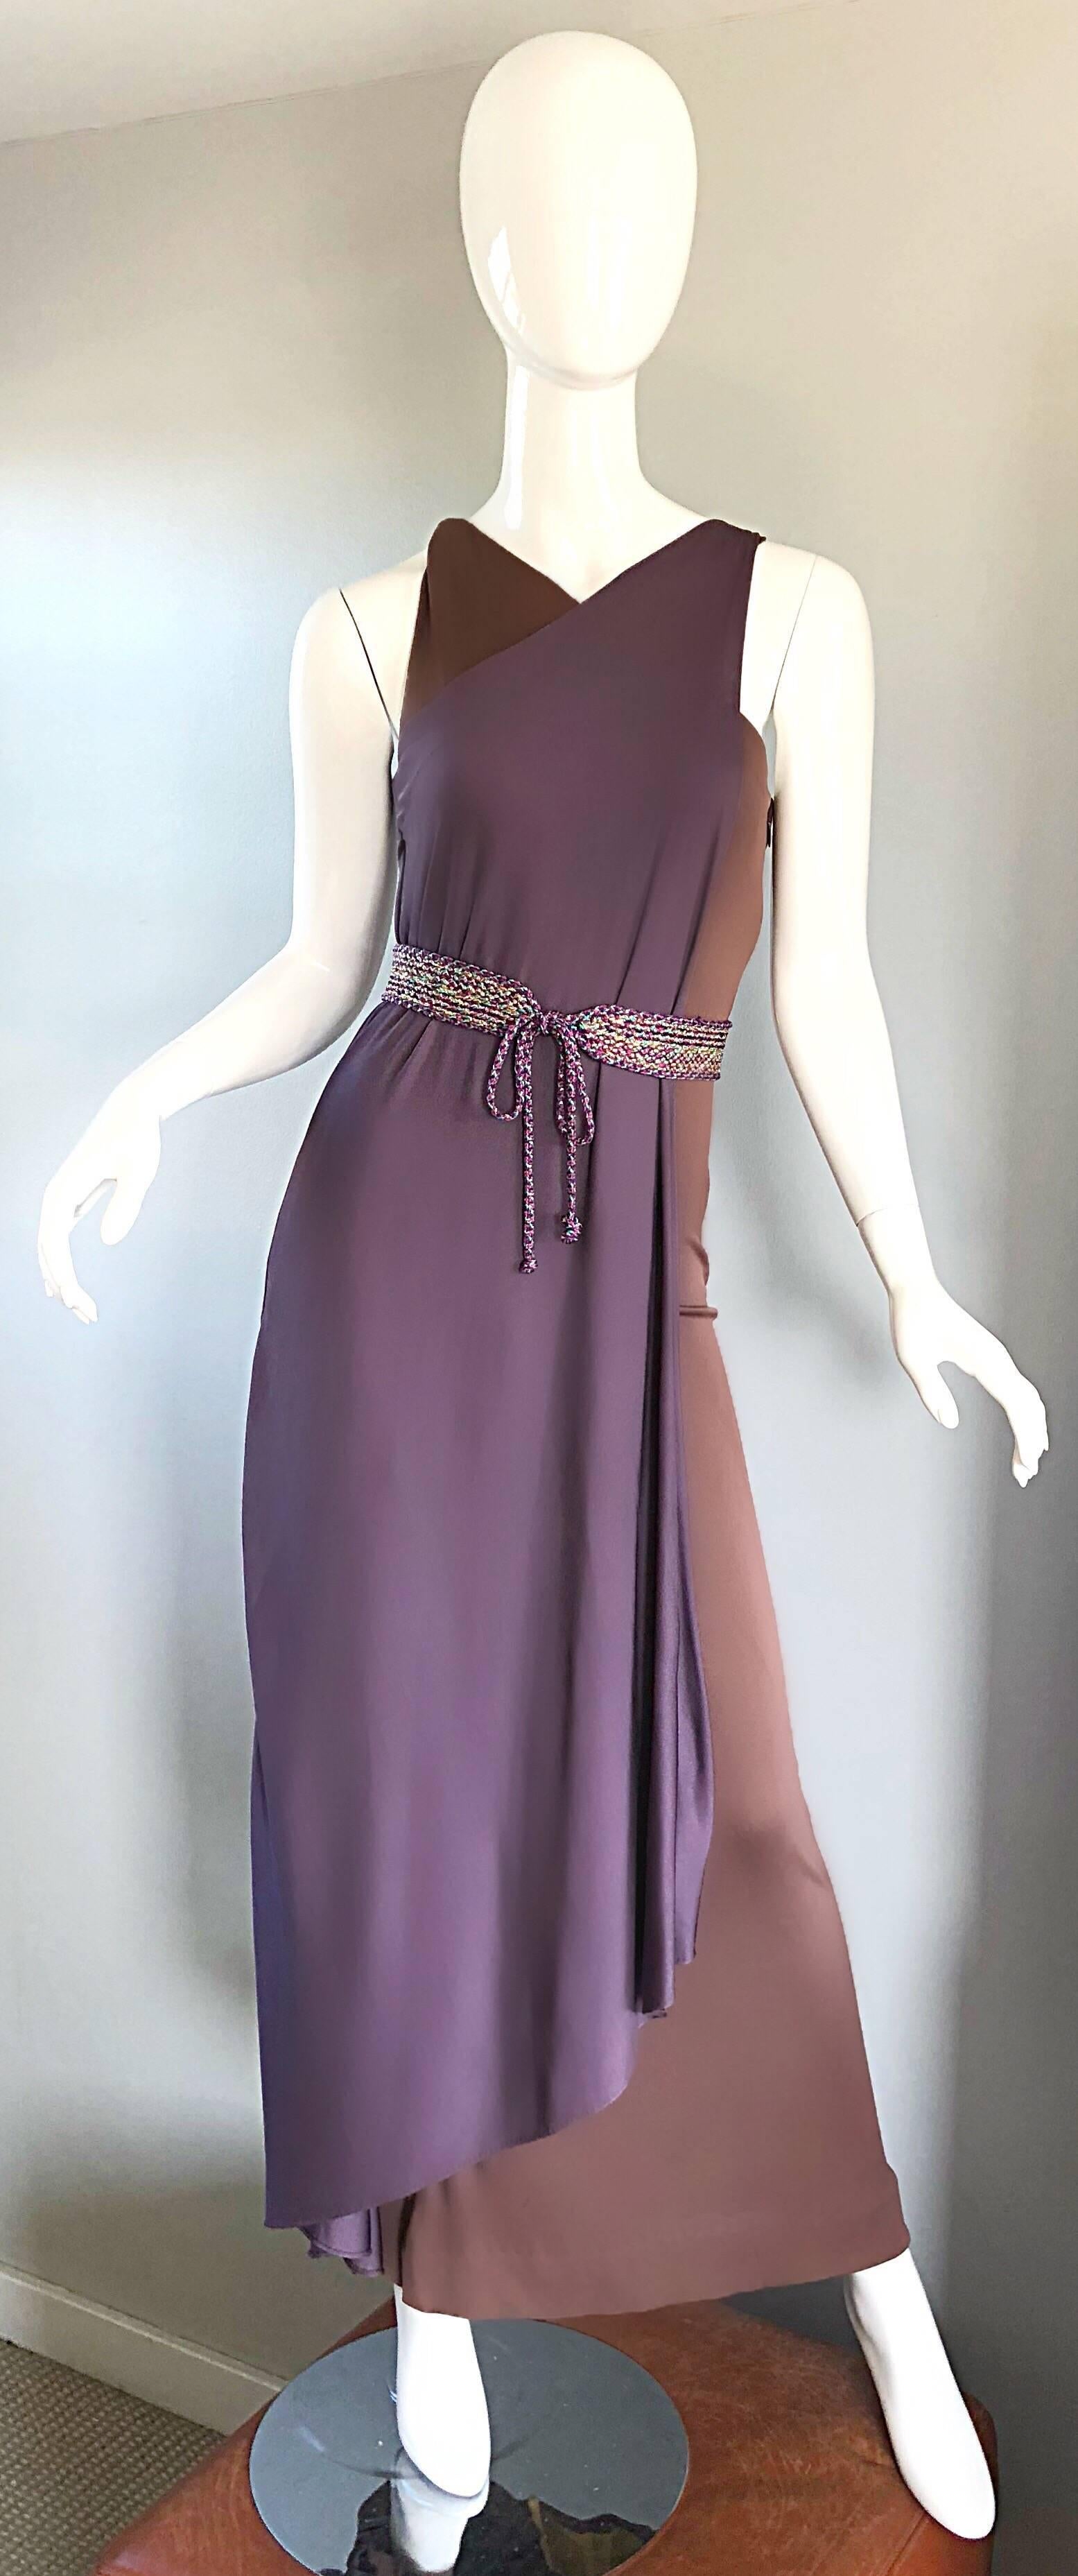 Gorgeous 70s BILL BLASS purple and brown silk jersey Avant Garde Grecian inspired color block belted evening dress! Slinky silk jersey fabric hugs the body in all the right places, and allows for plenty of stretch. Brown body, with a purple overlay.